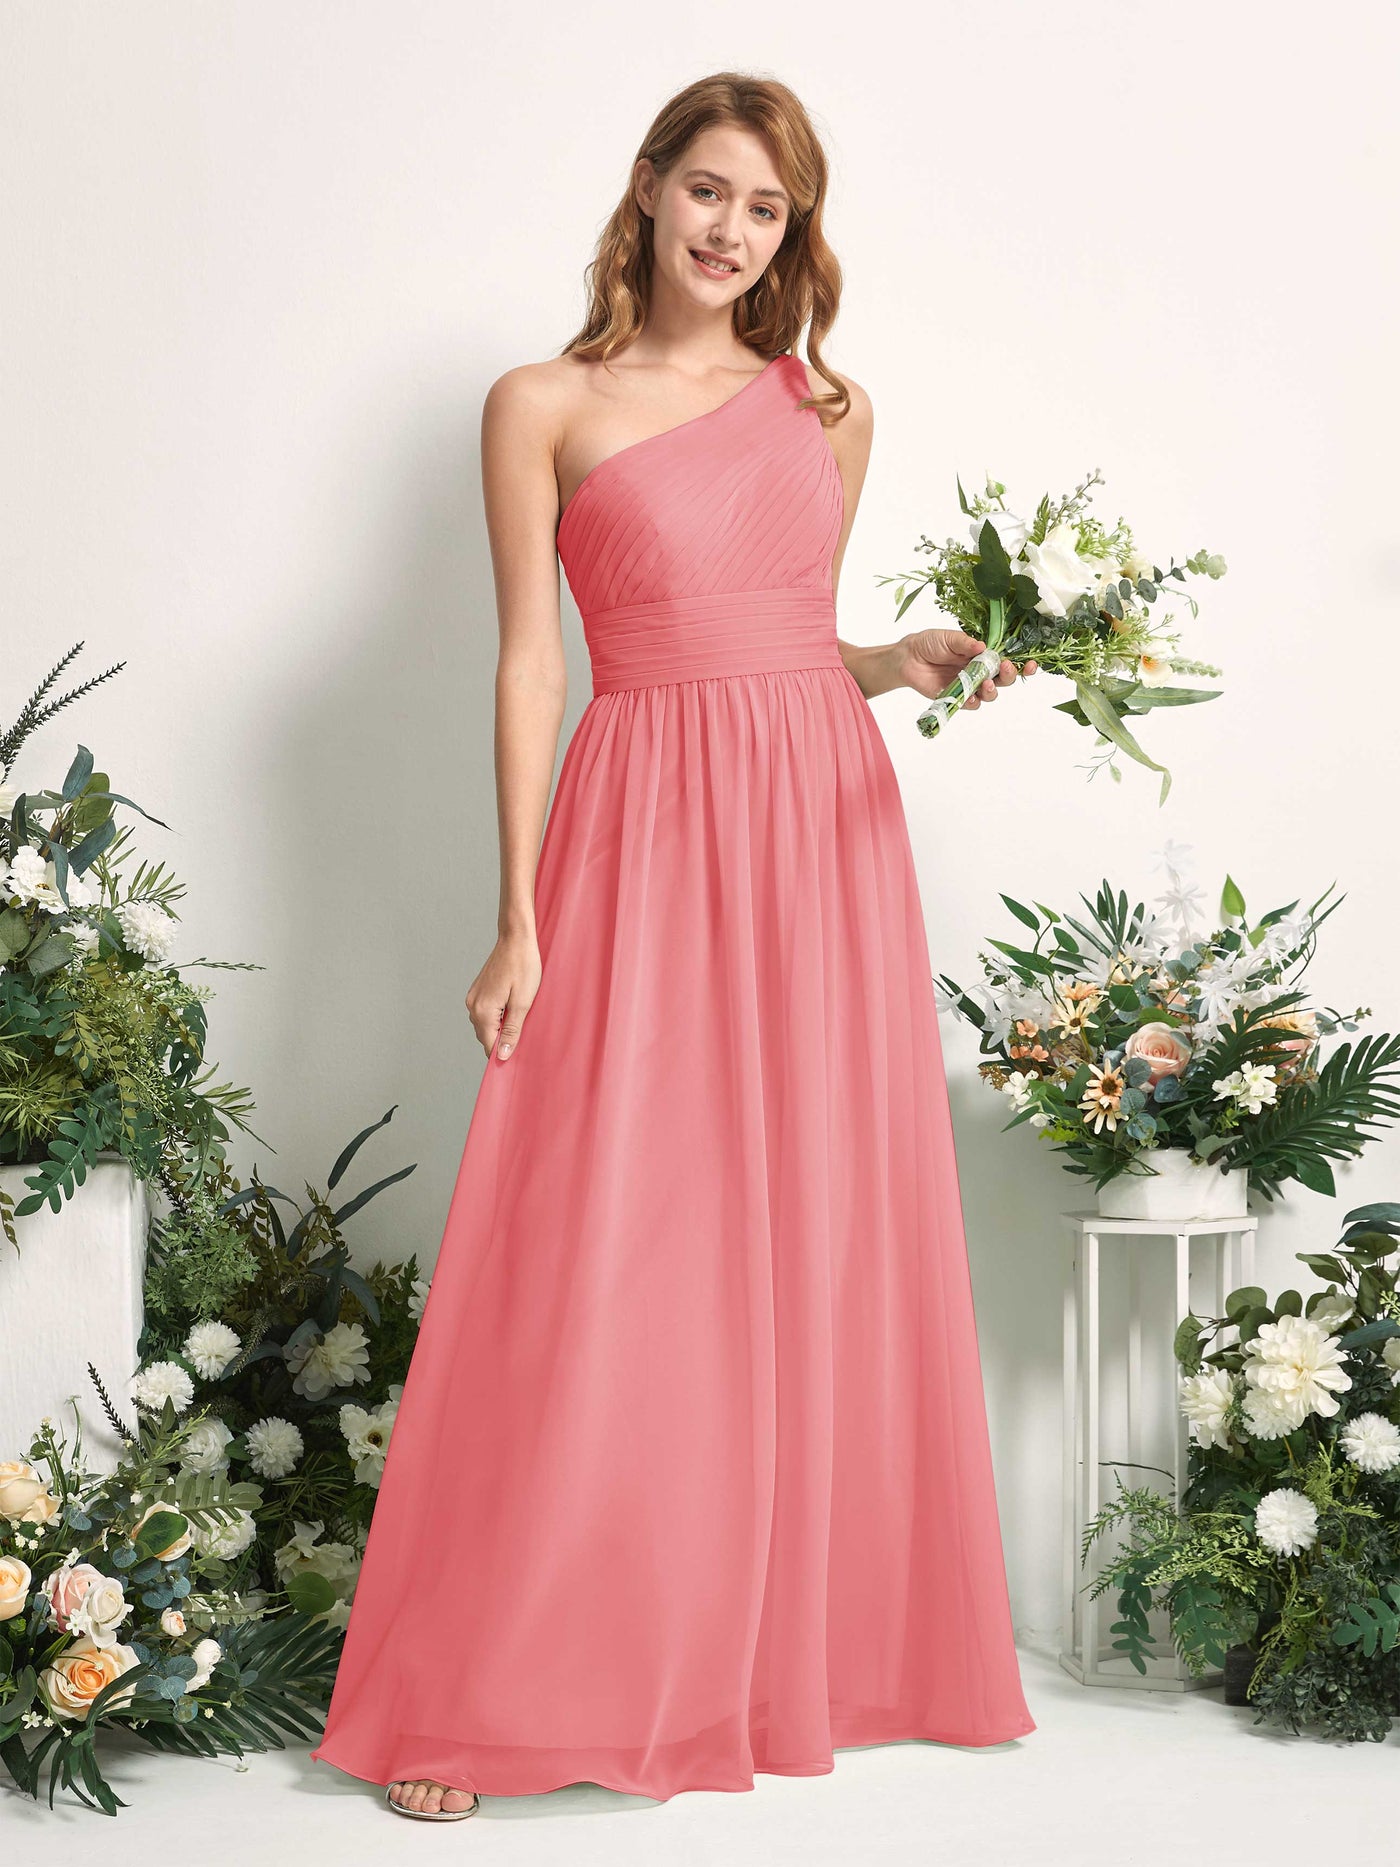 Bridesmaid Dress A-line Chiffon One Shoulder Full Length Sleeveless Wedding Party Dress - Coral Pink (81226730)#color_coral-pink